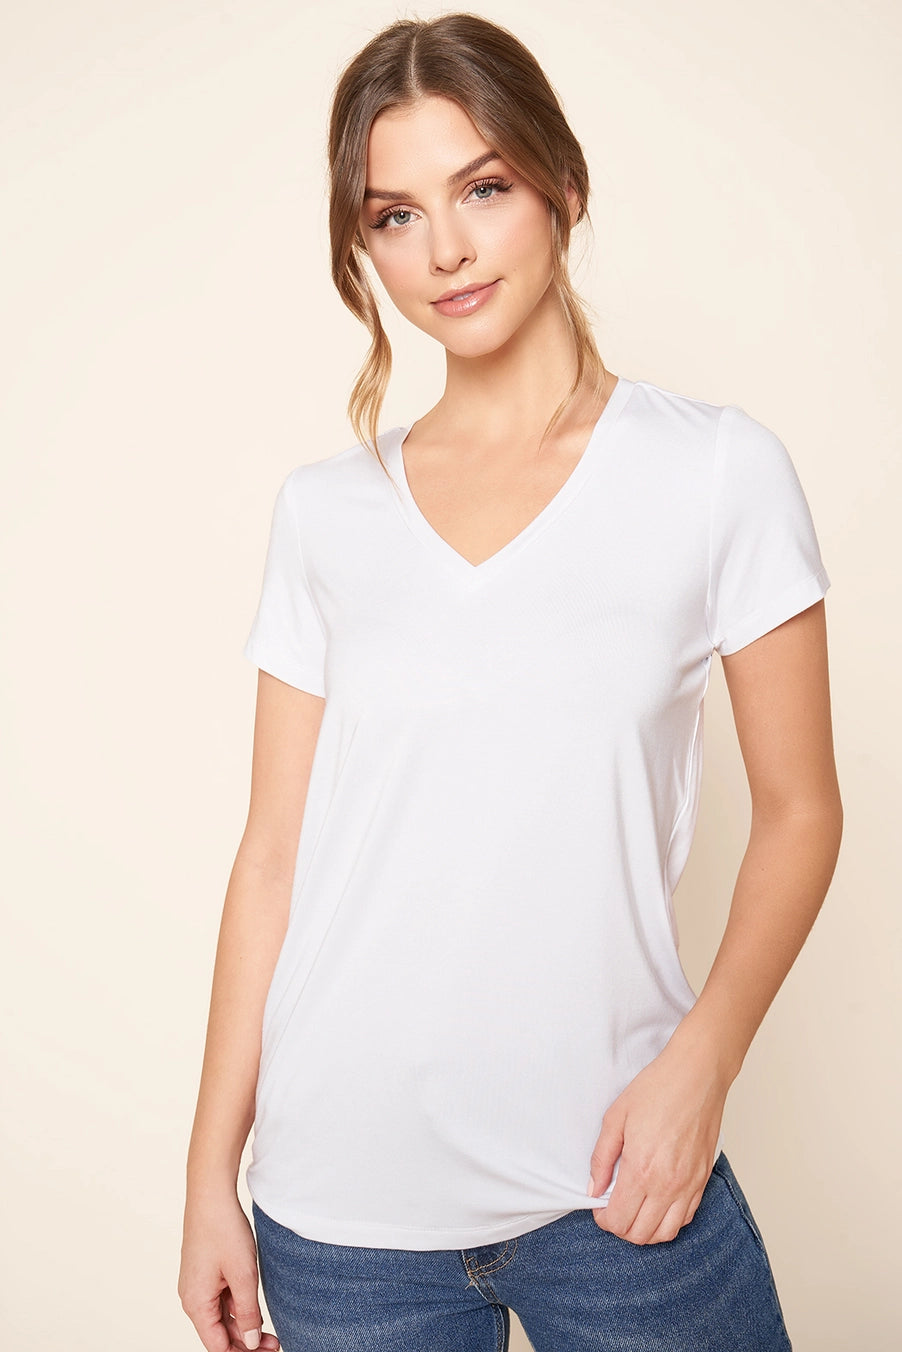 Your Favorite V-Neck Tee